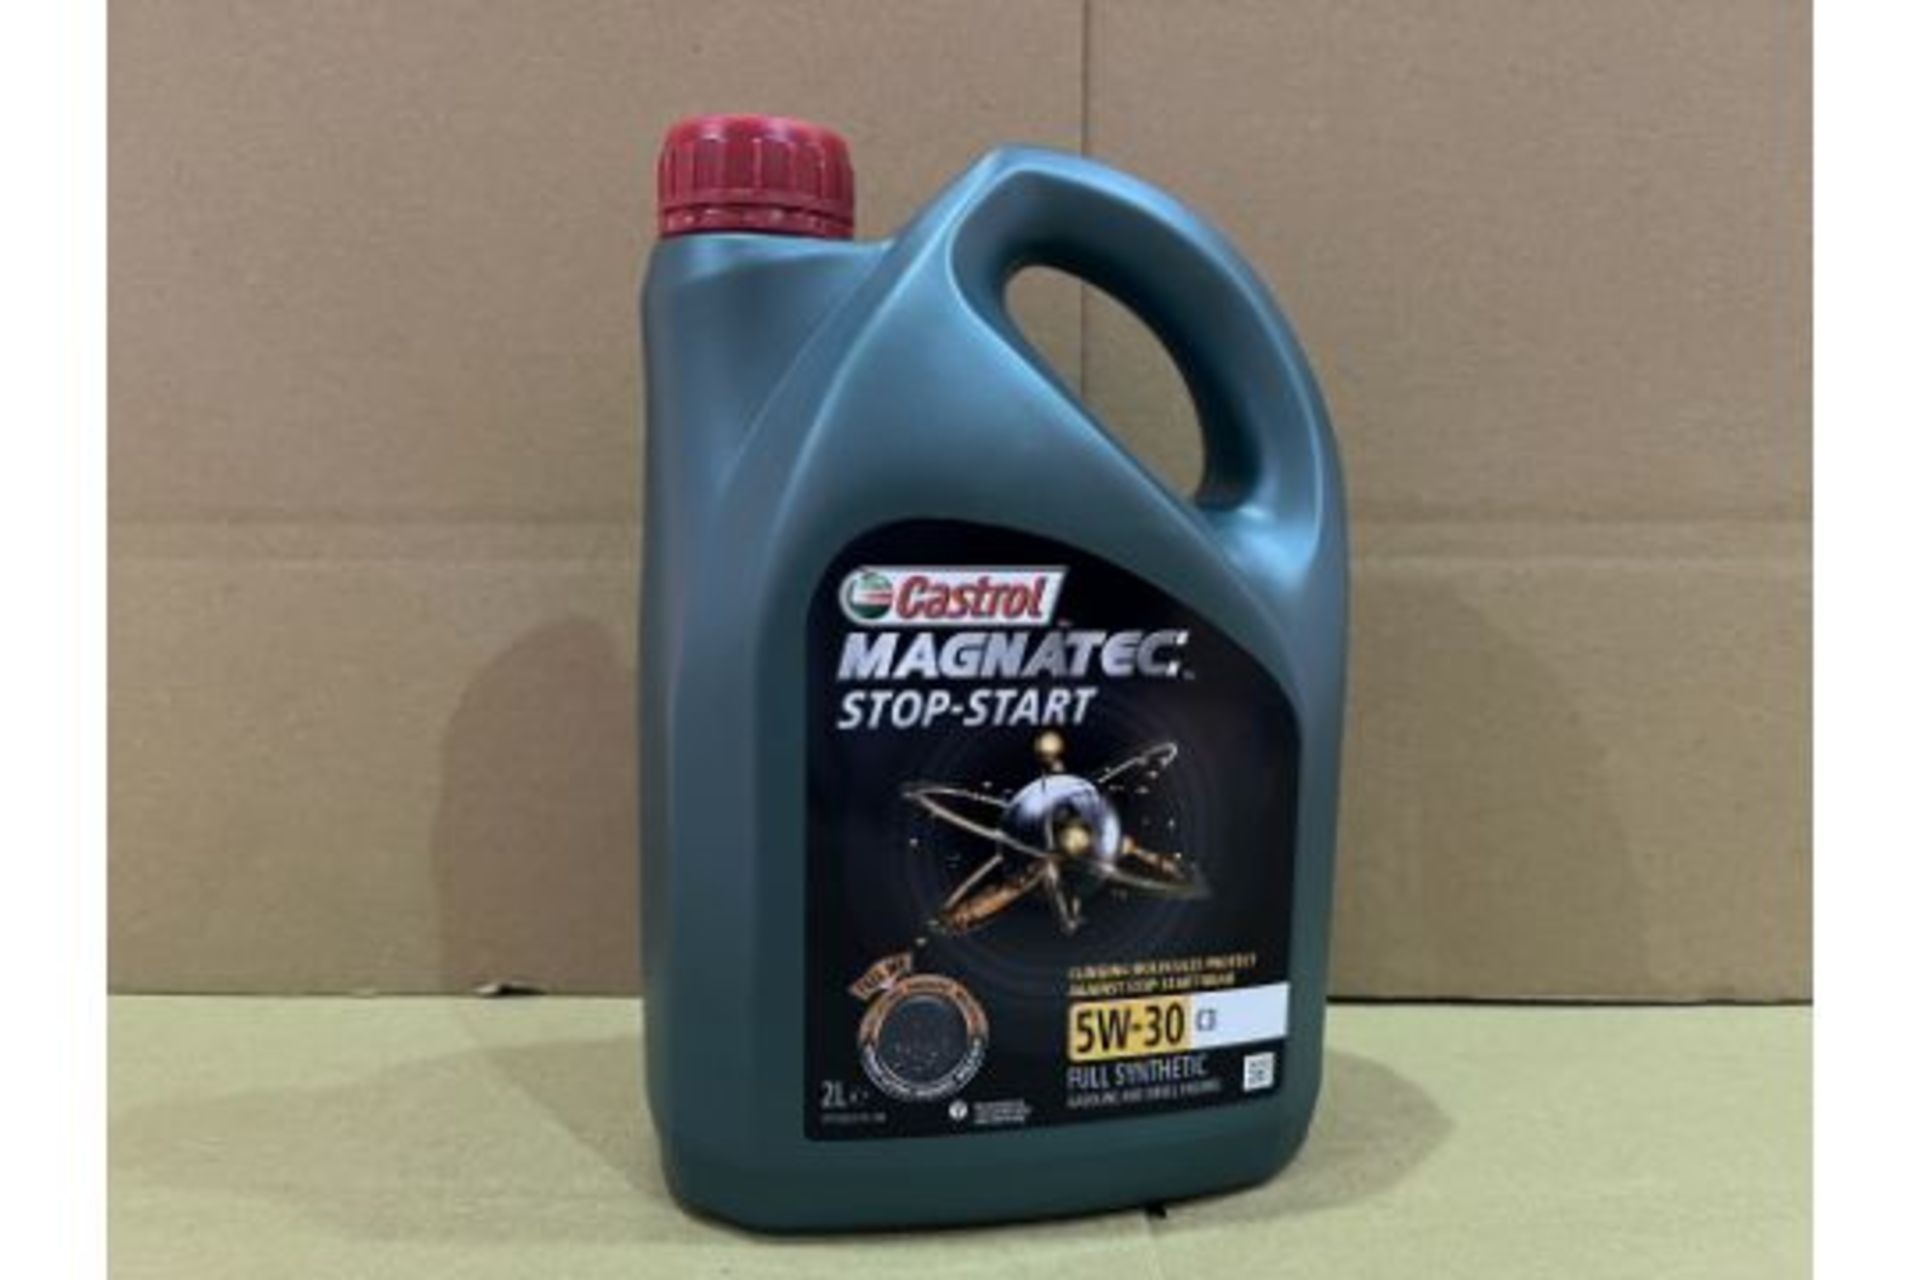 16 X BRAND NEW CASTROL MAGNATEC FULLY SYNTHETIC 5W-30 OIL 2L R15